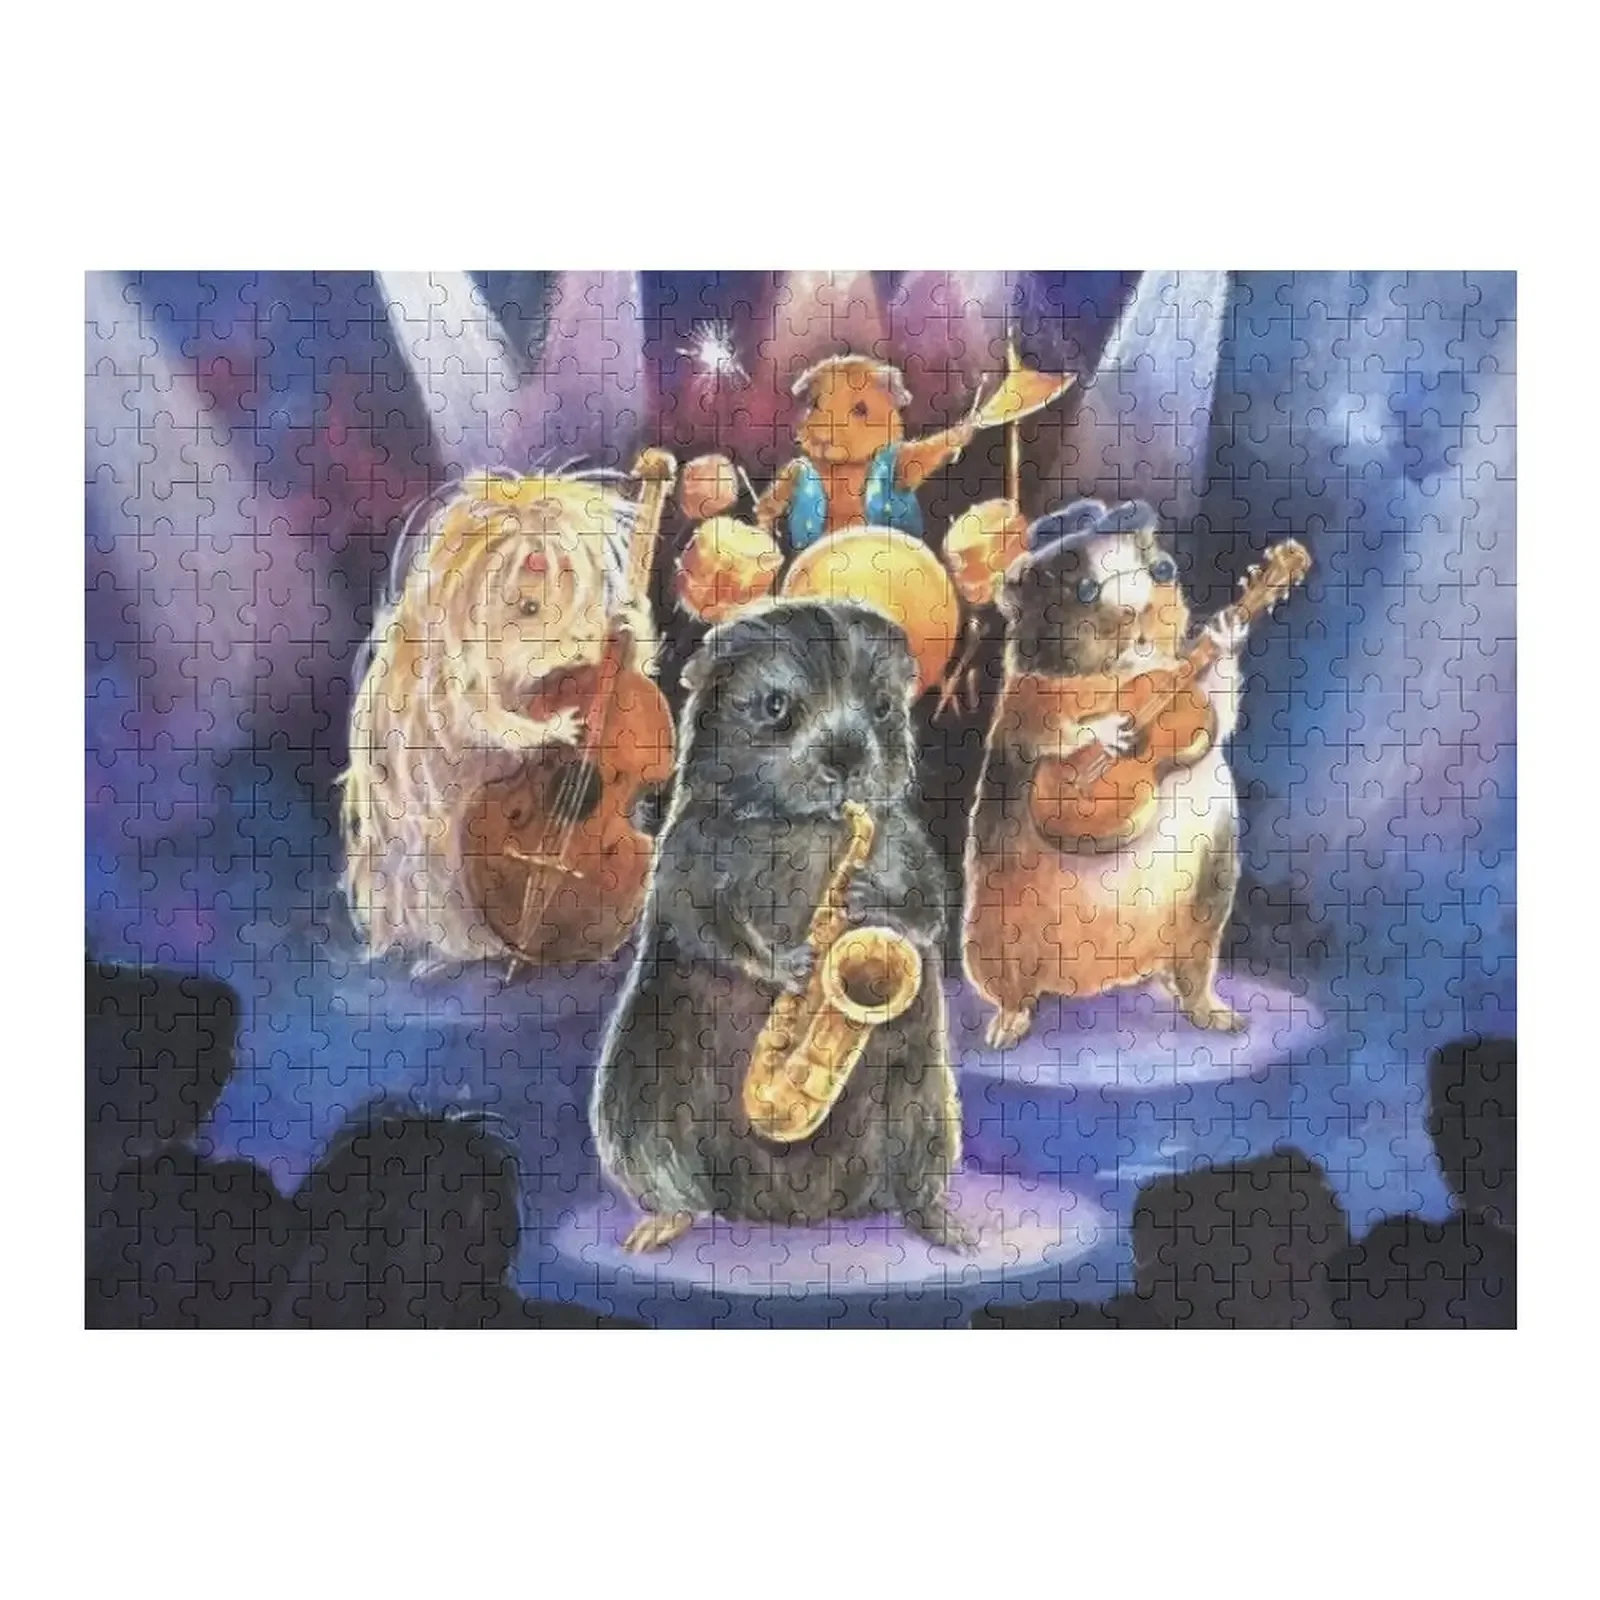 The Blues Band Jigsaw Puzzle Personalized Gift Married For Children Puzzle the blues band jigsaw puzzle customizeds for kids personalized gifts photo personalized gifts puzzle